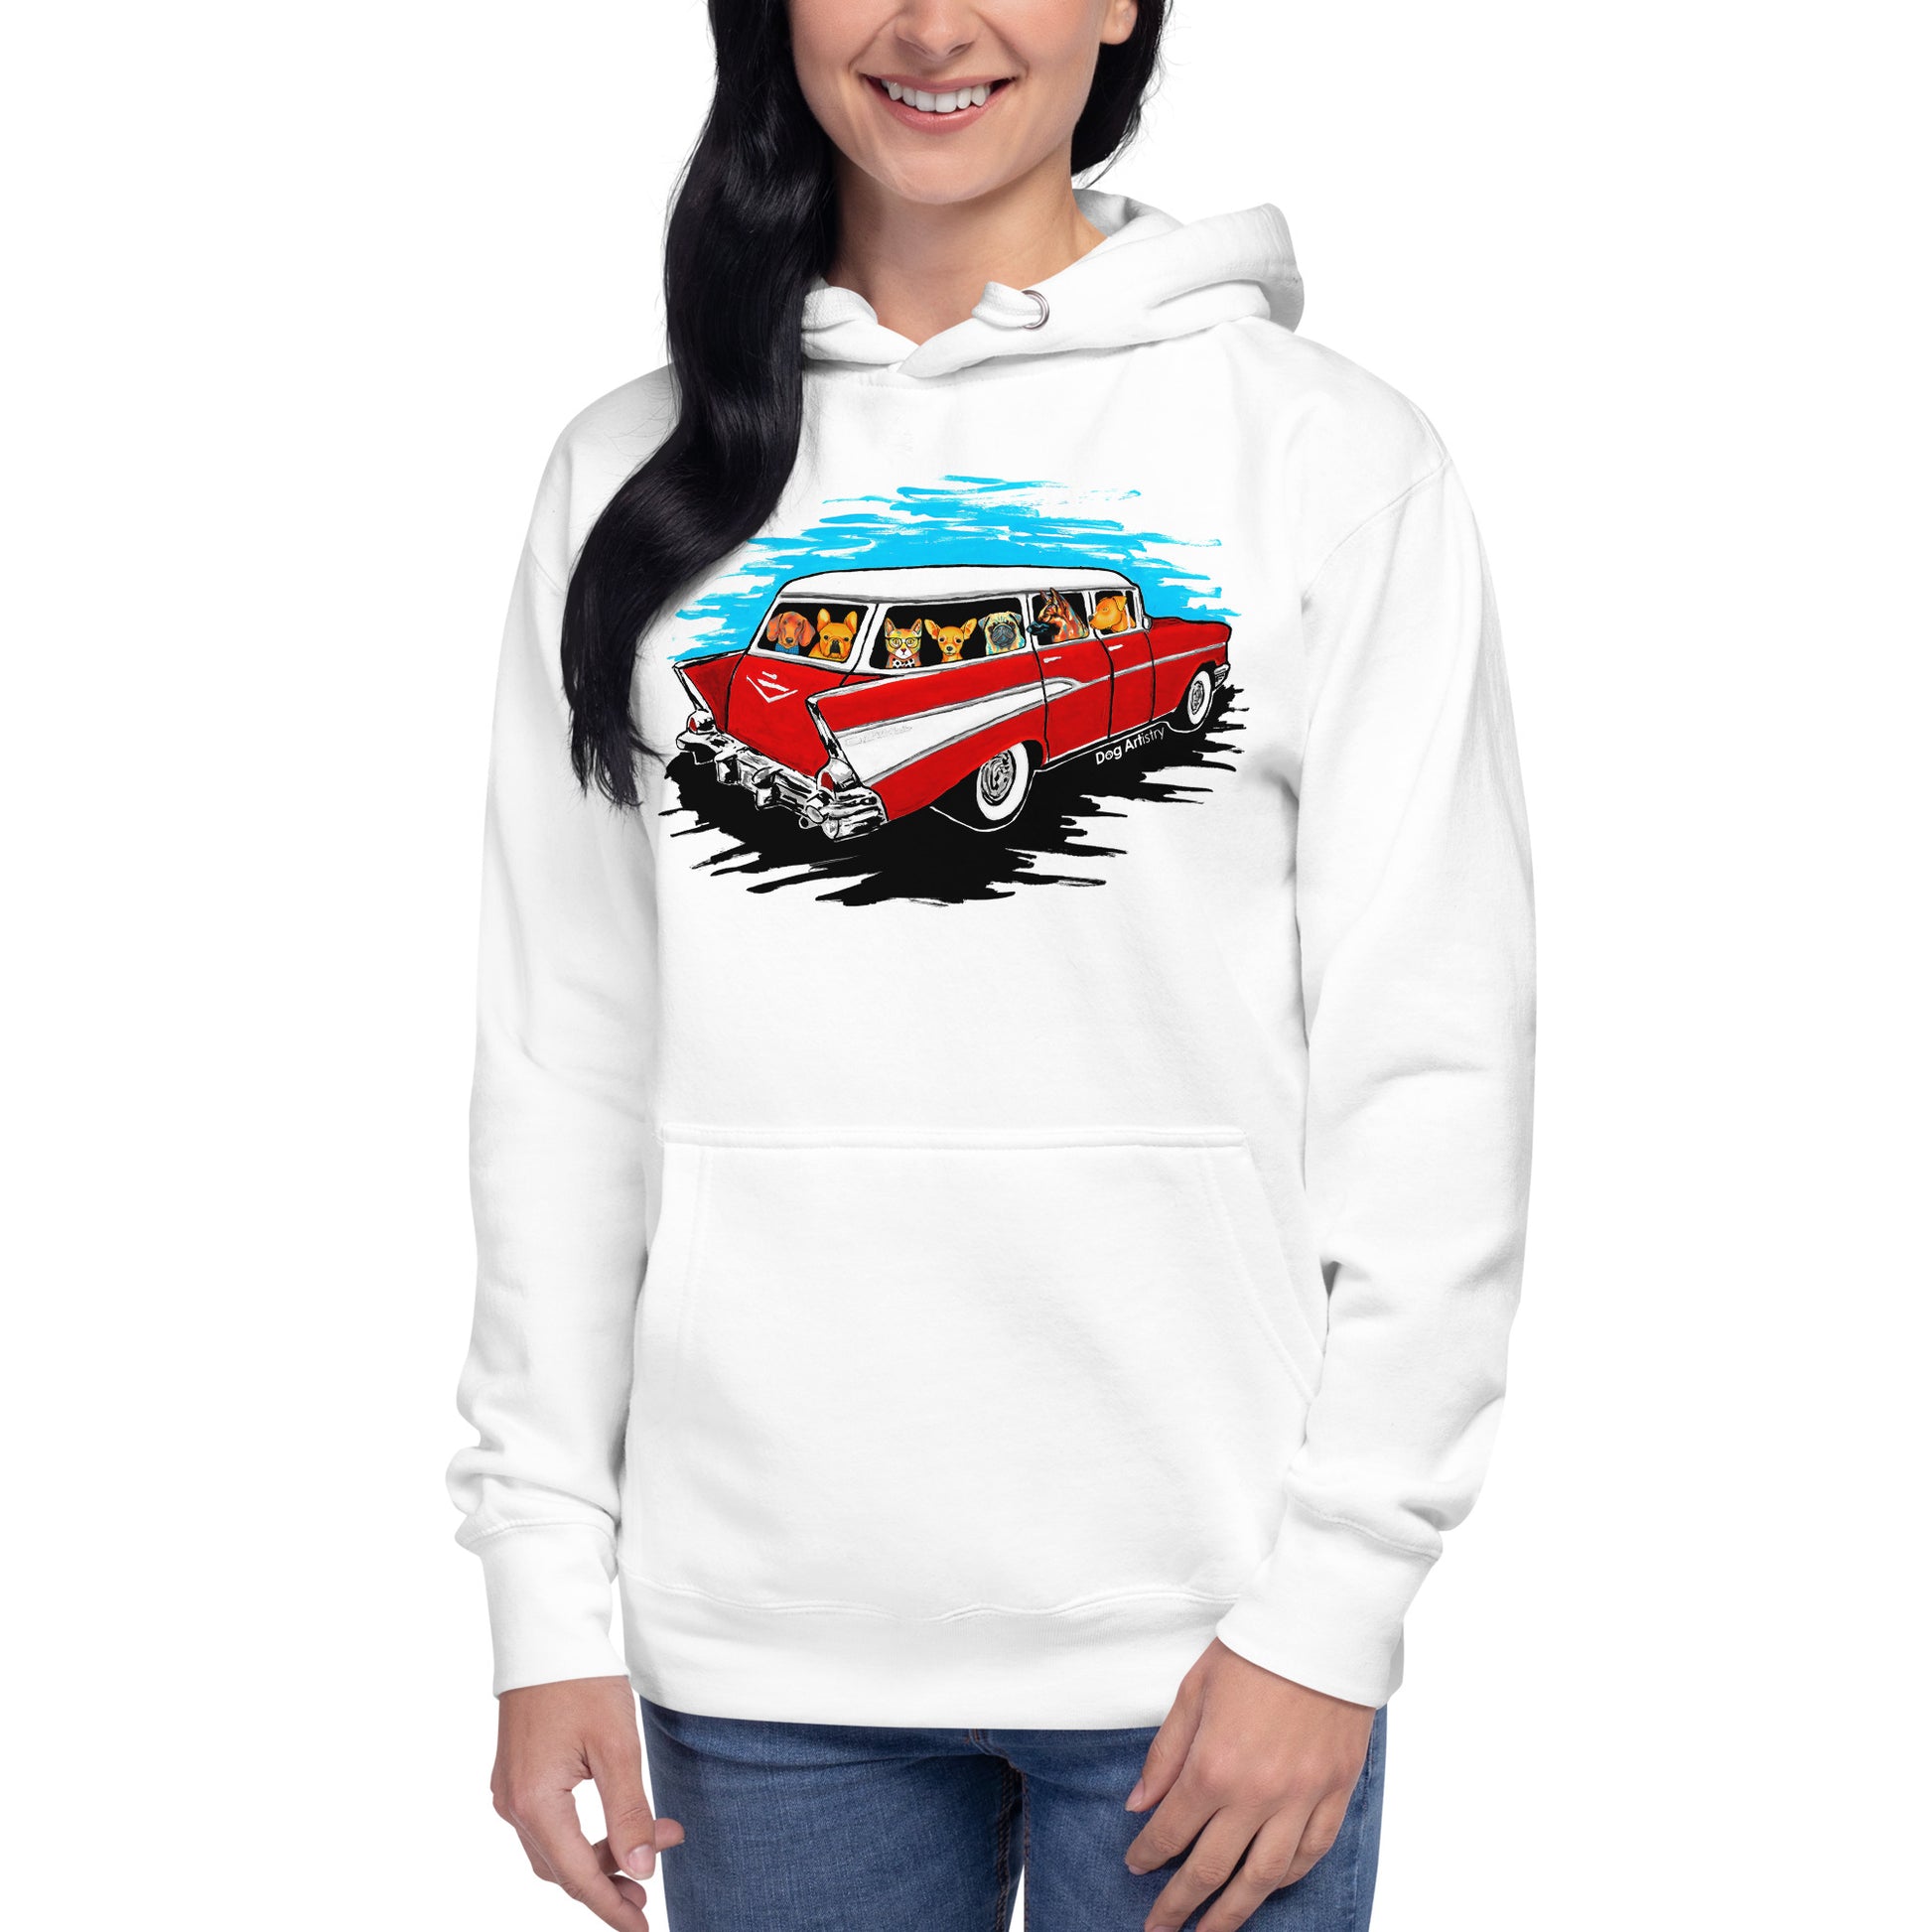 Dog Artistry Unisex Hoodie of a 57 Chevy Wagon full of dogs, Dachshund, French Bulldog, Cat, Chihuahua, Pug, German Shepherd, and Pit Bull.